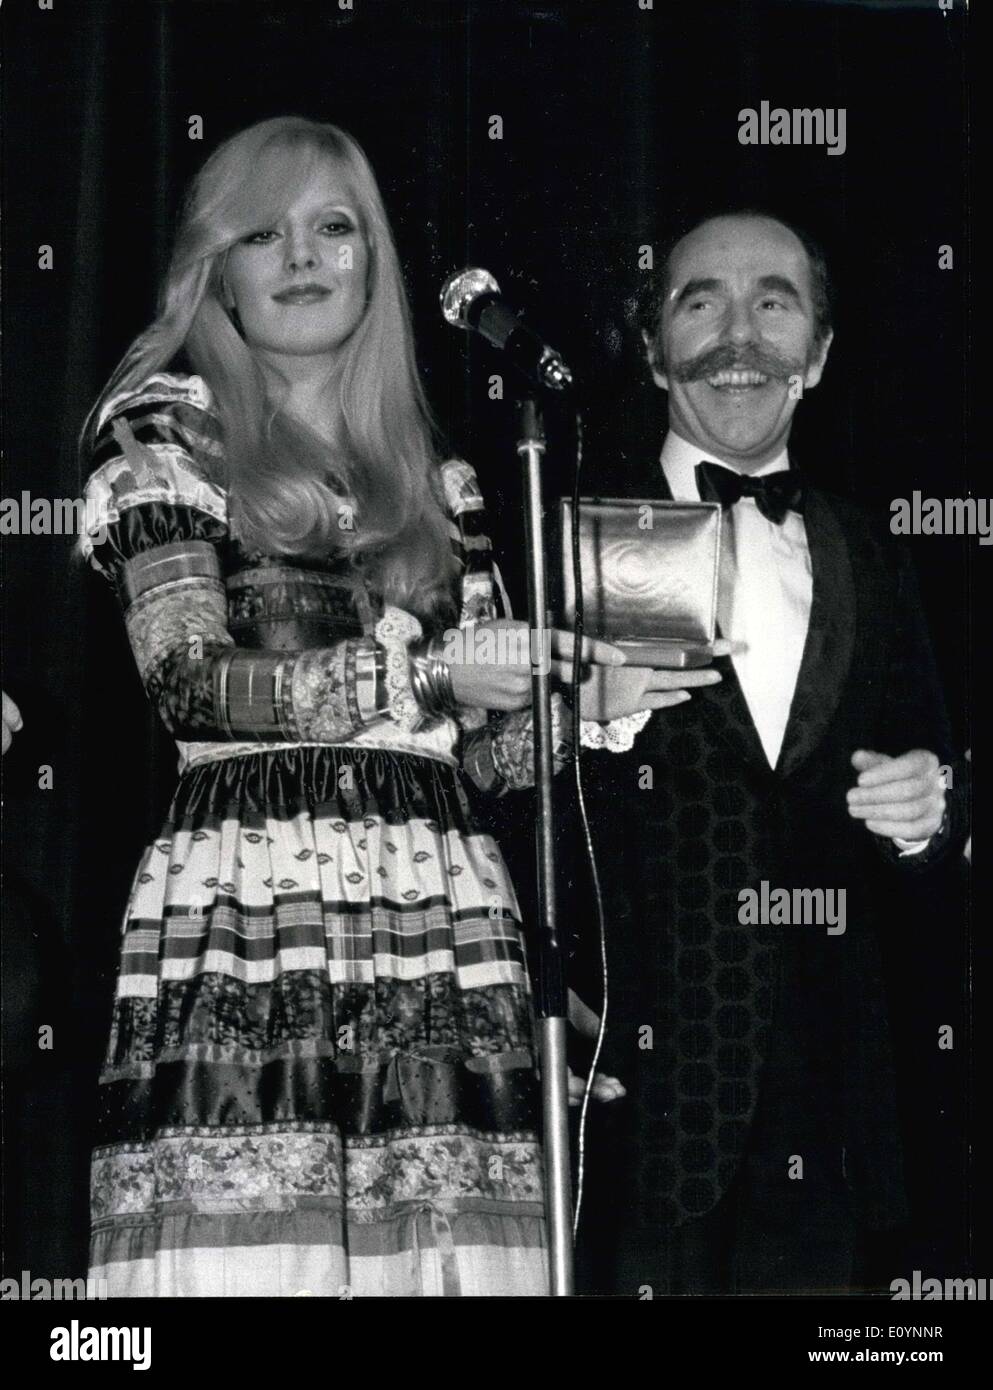 Dec. 18, 1970 - Sylvie Vartan Awarded Cinema ''Triumph'': Sylvia Vartan was one of the winners of the cinema Triumphs, French Cine Oscar Awarded at the Marigny Theatre, Paris, last night. Photo sows Sylv~e Vartan pictured ith her ''Triumph'' on right Jean Paul Rouland, French Comedian. Stock Photo